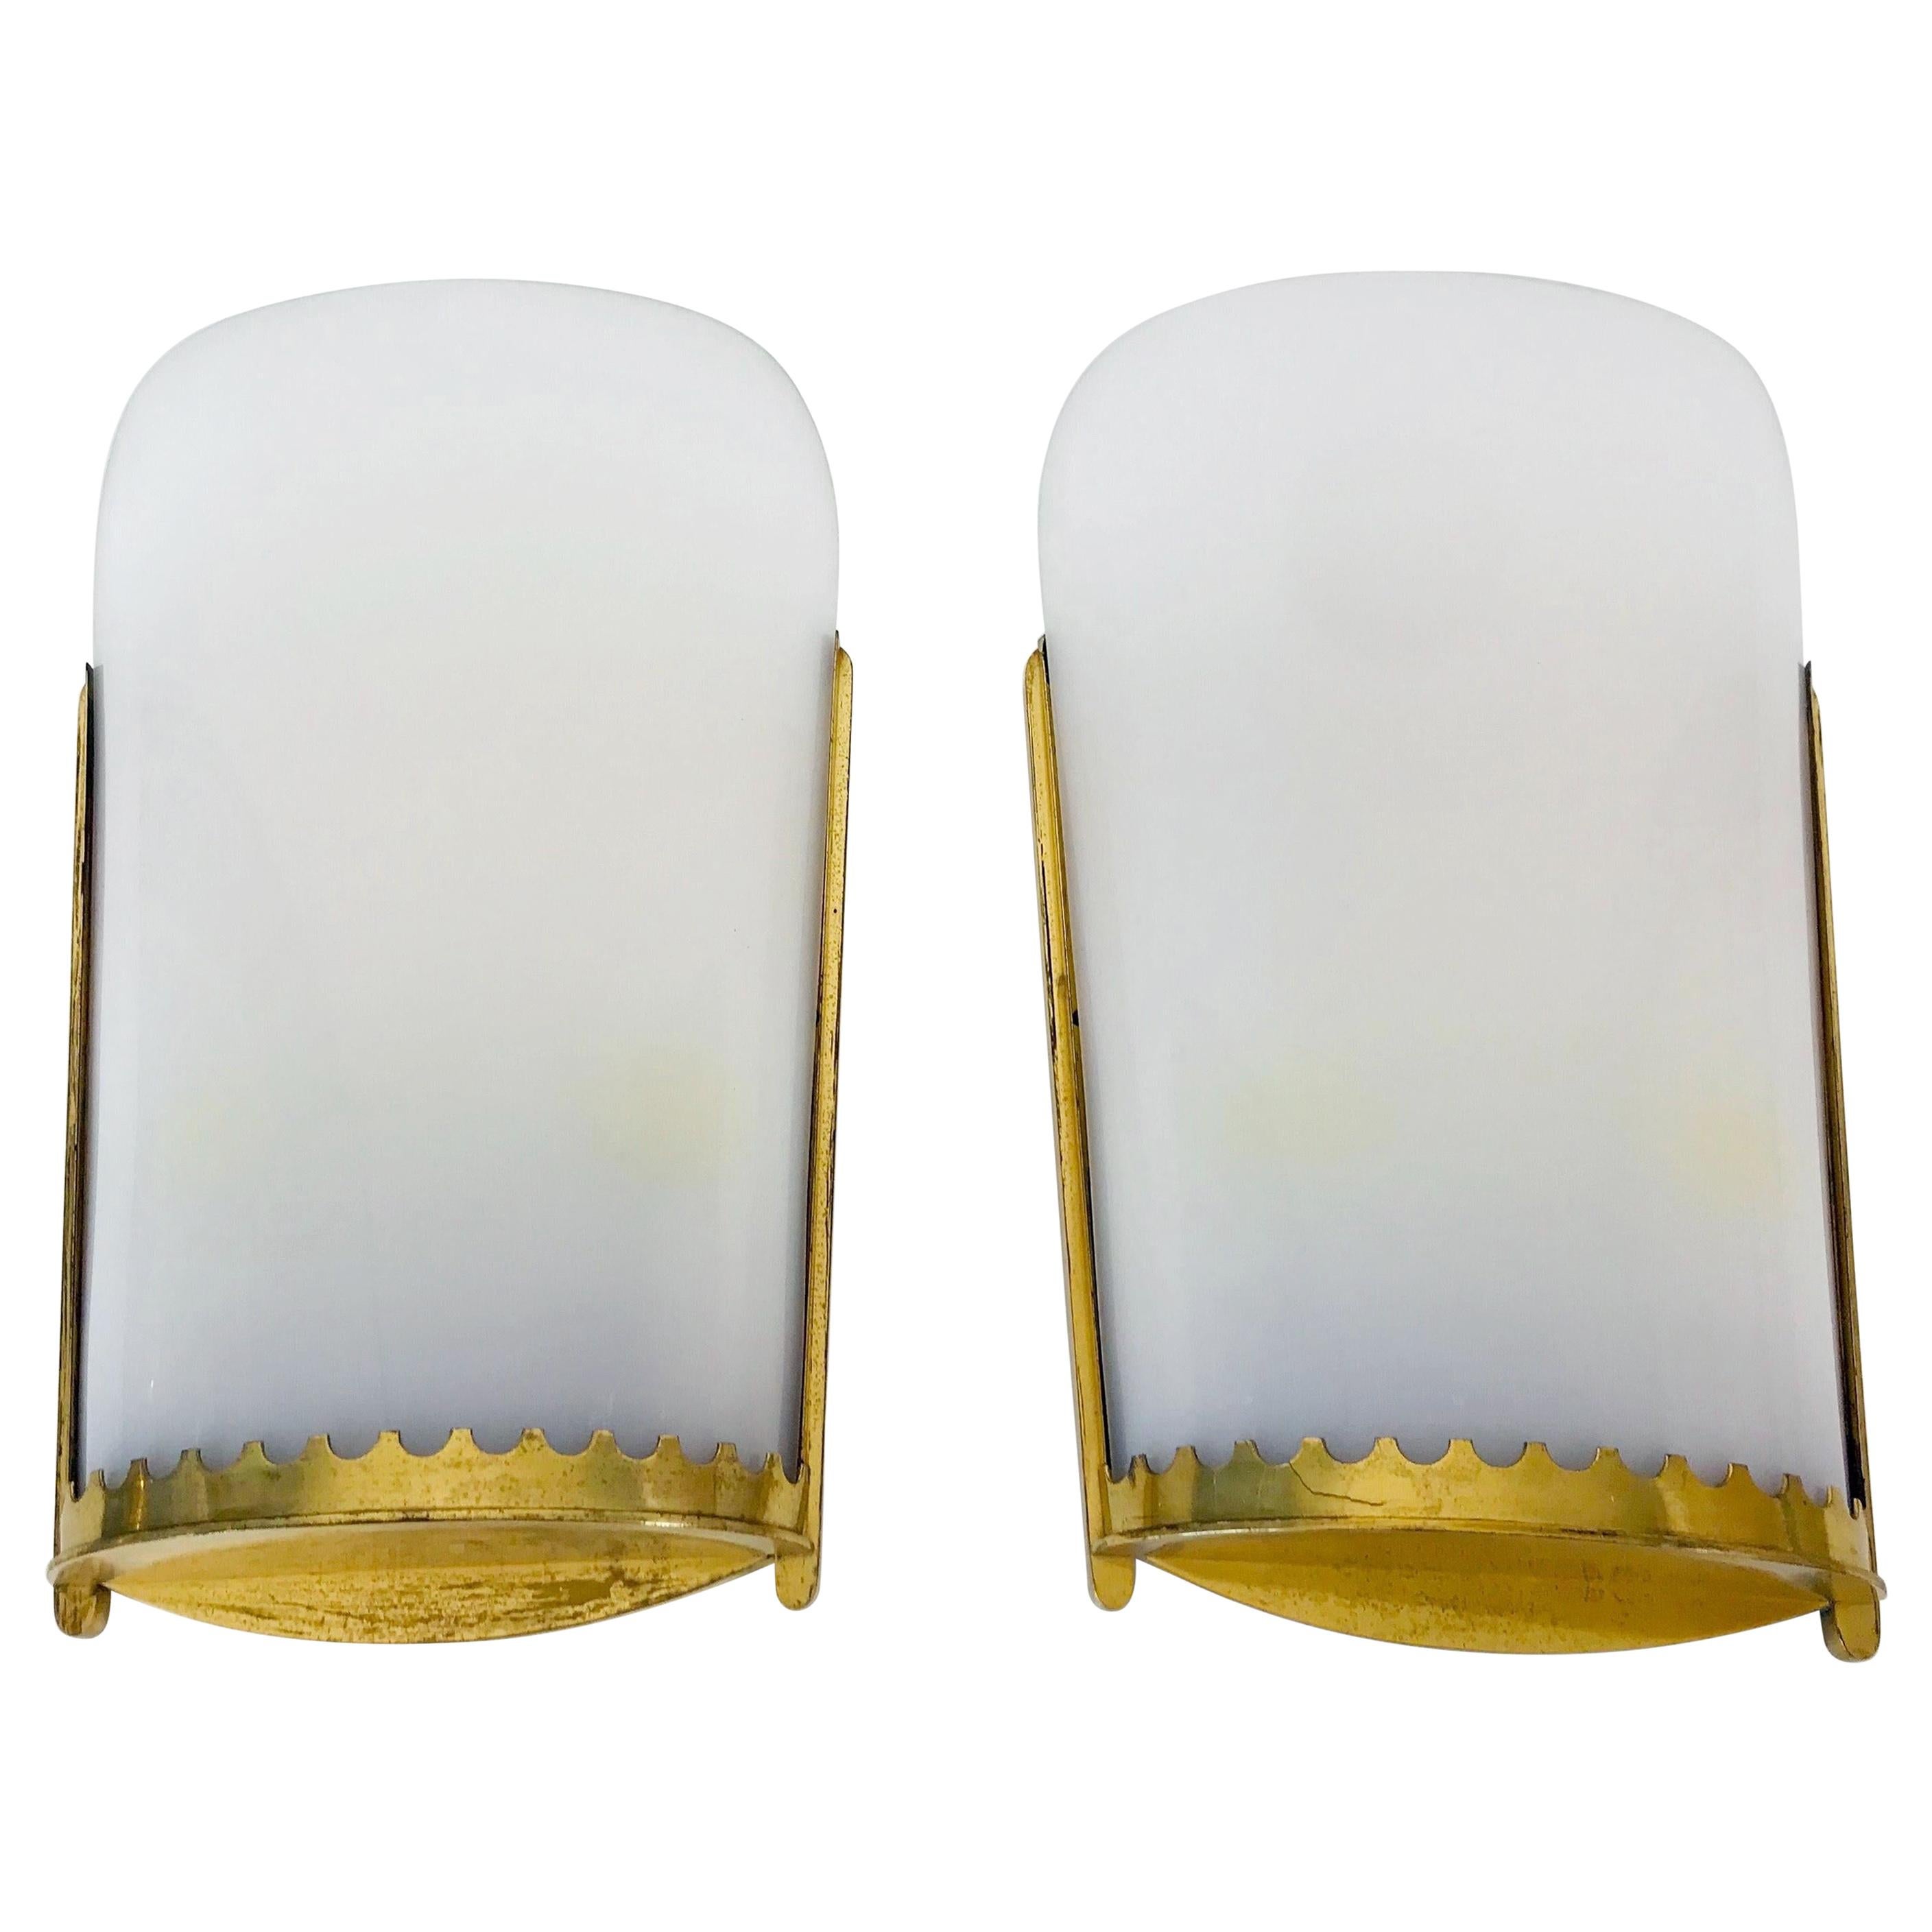 Huge Pair of Mid-Century Modern Brass and Perspex Cinema Wall Lamps, 1950s For Sale